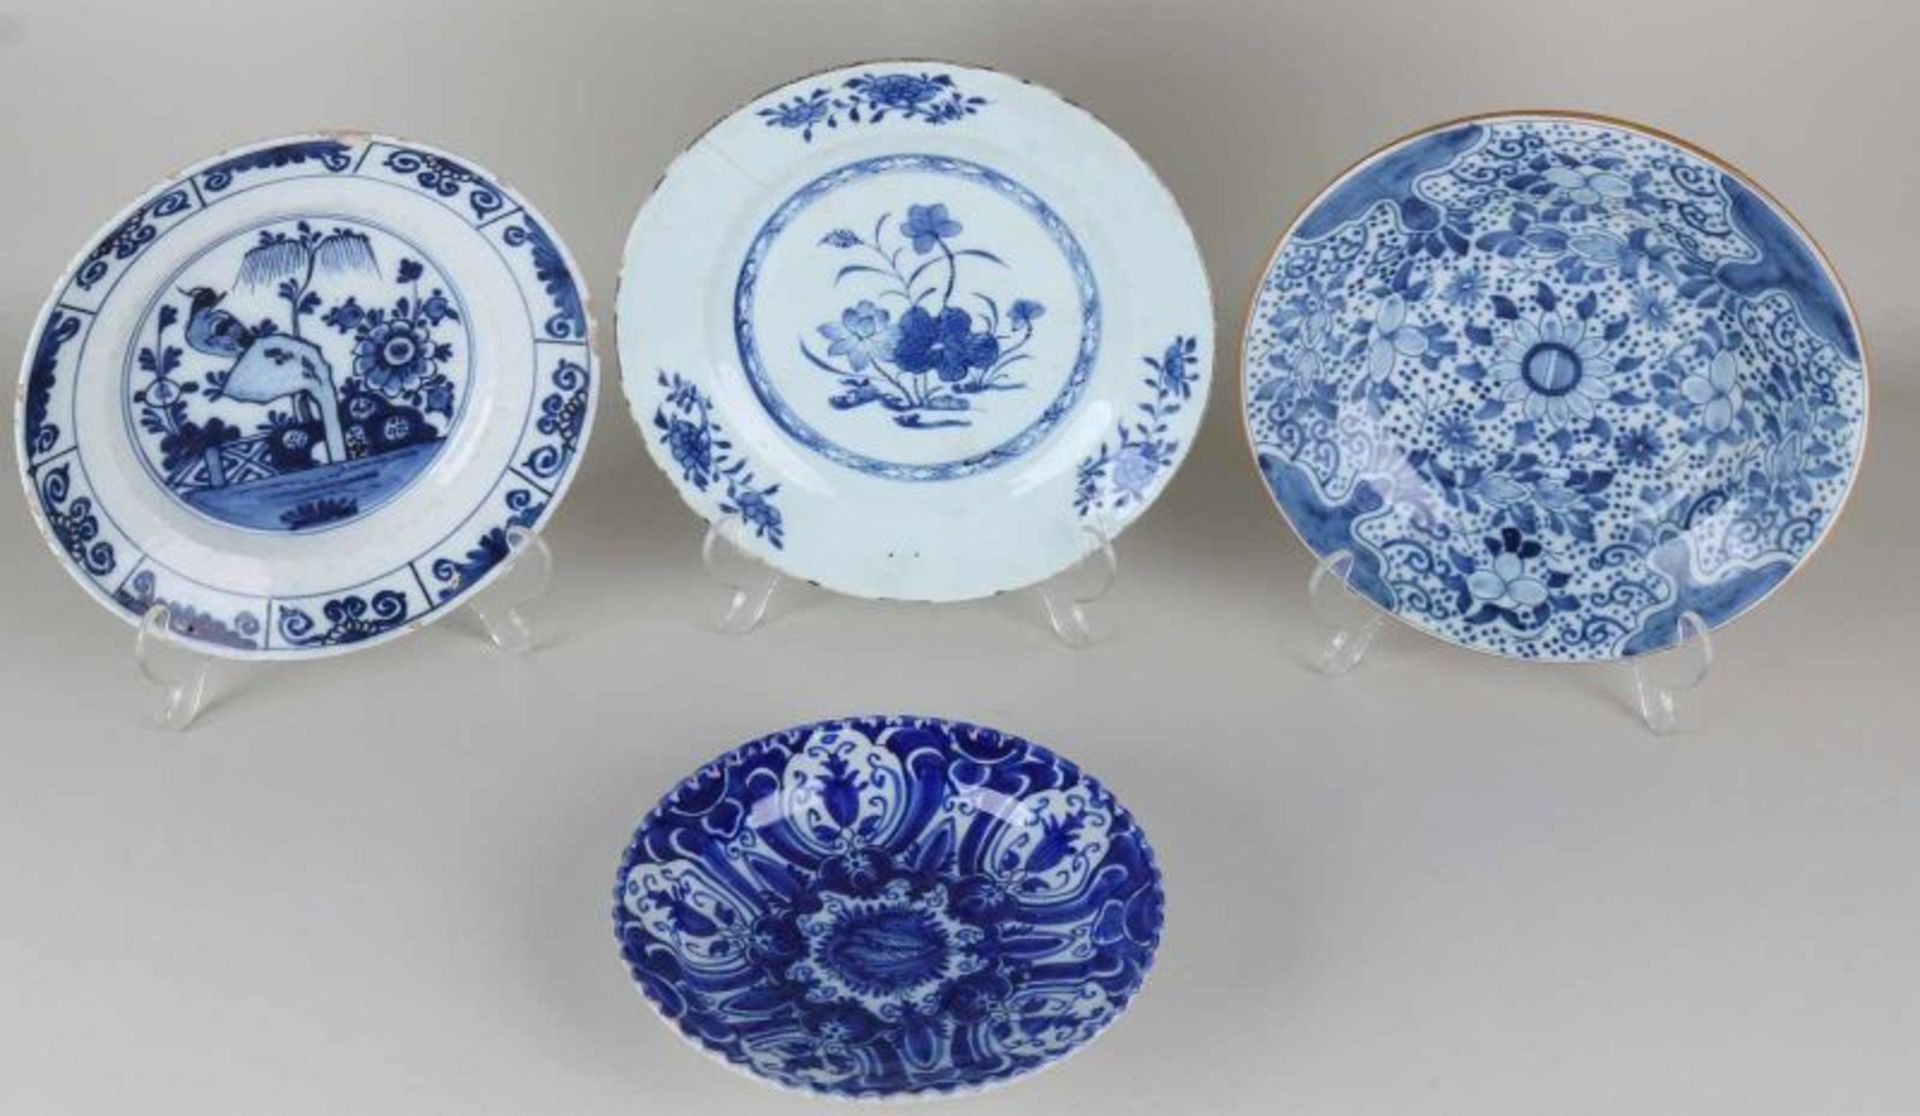 Four 18th - 19th century porcelain and Delft Fayence plates. One time floral folding dish, bottom